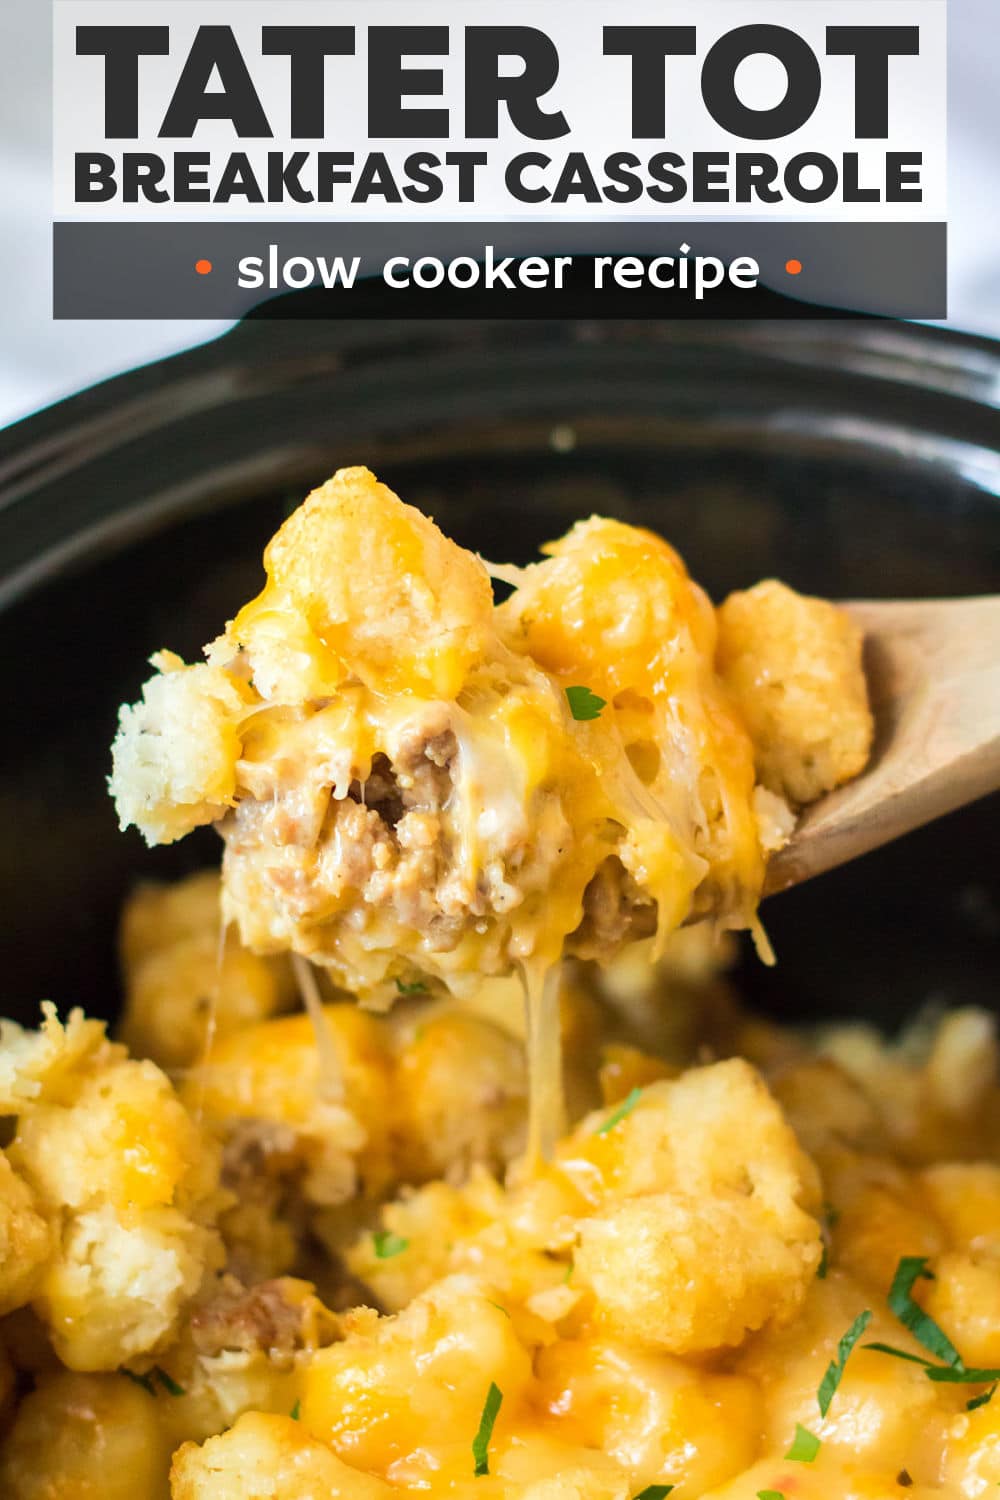 Slow Cooker Tater Tot Breakfast Casserole is a delicious, hearty breakfast bake that comes together right in the slow cooker!  Tater tots, sausage, eggs, and cheese make this savory casserole a favorite for kids and adults alike! | www.persnicketyplates.com